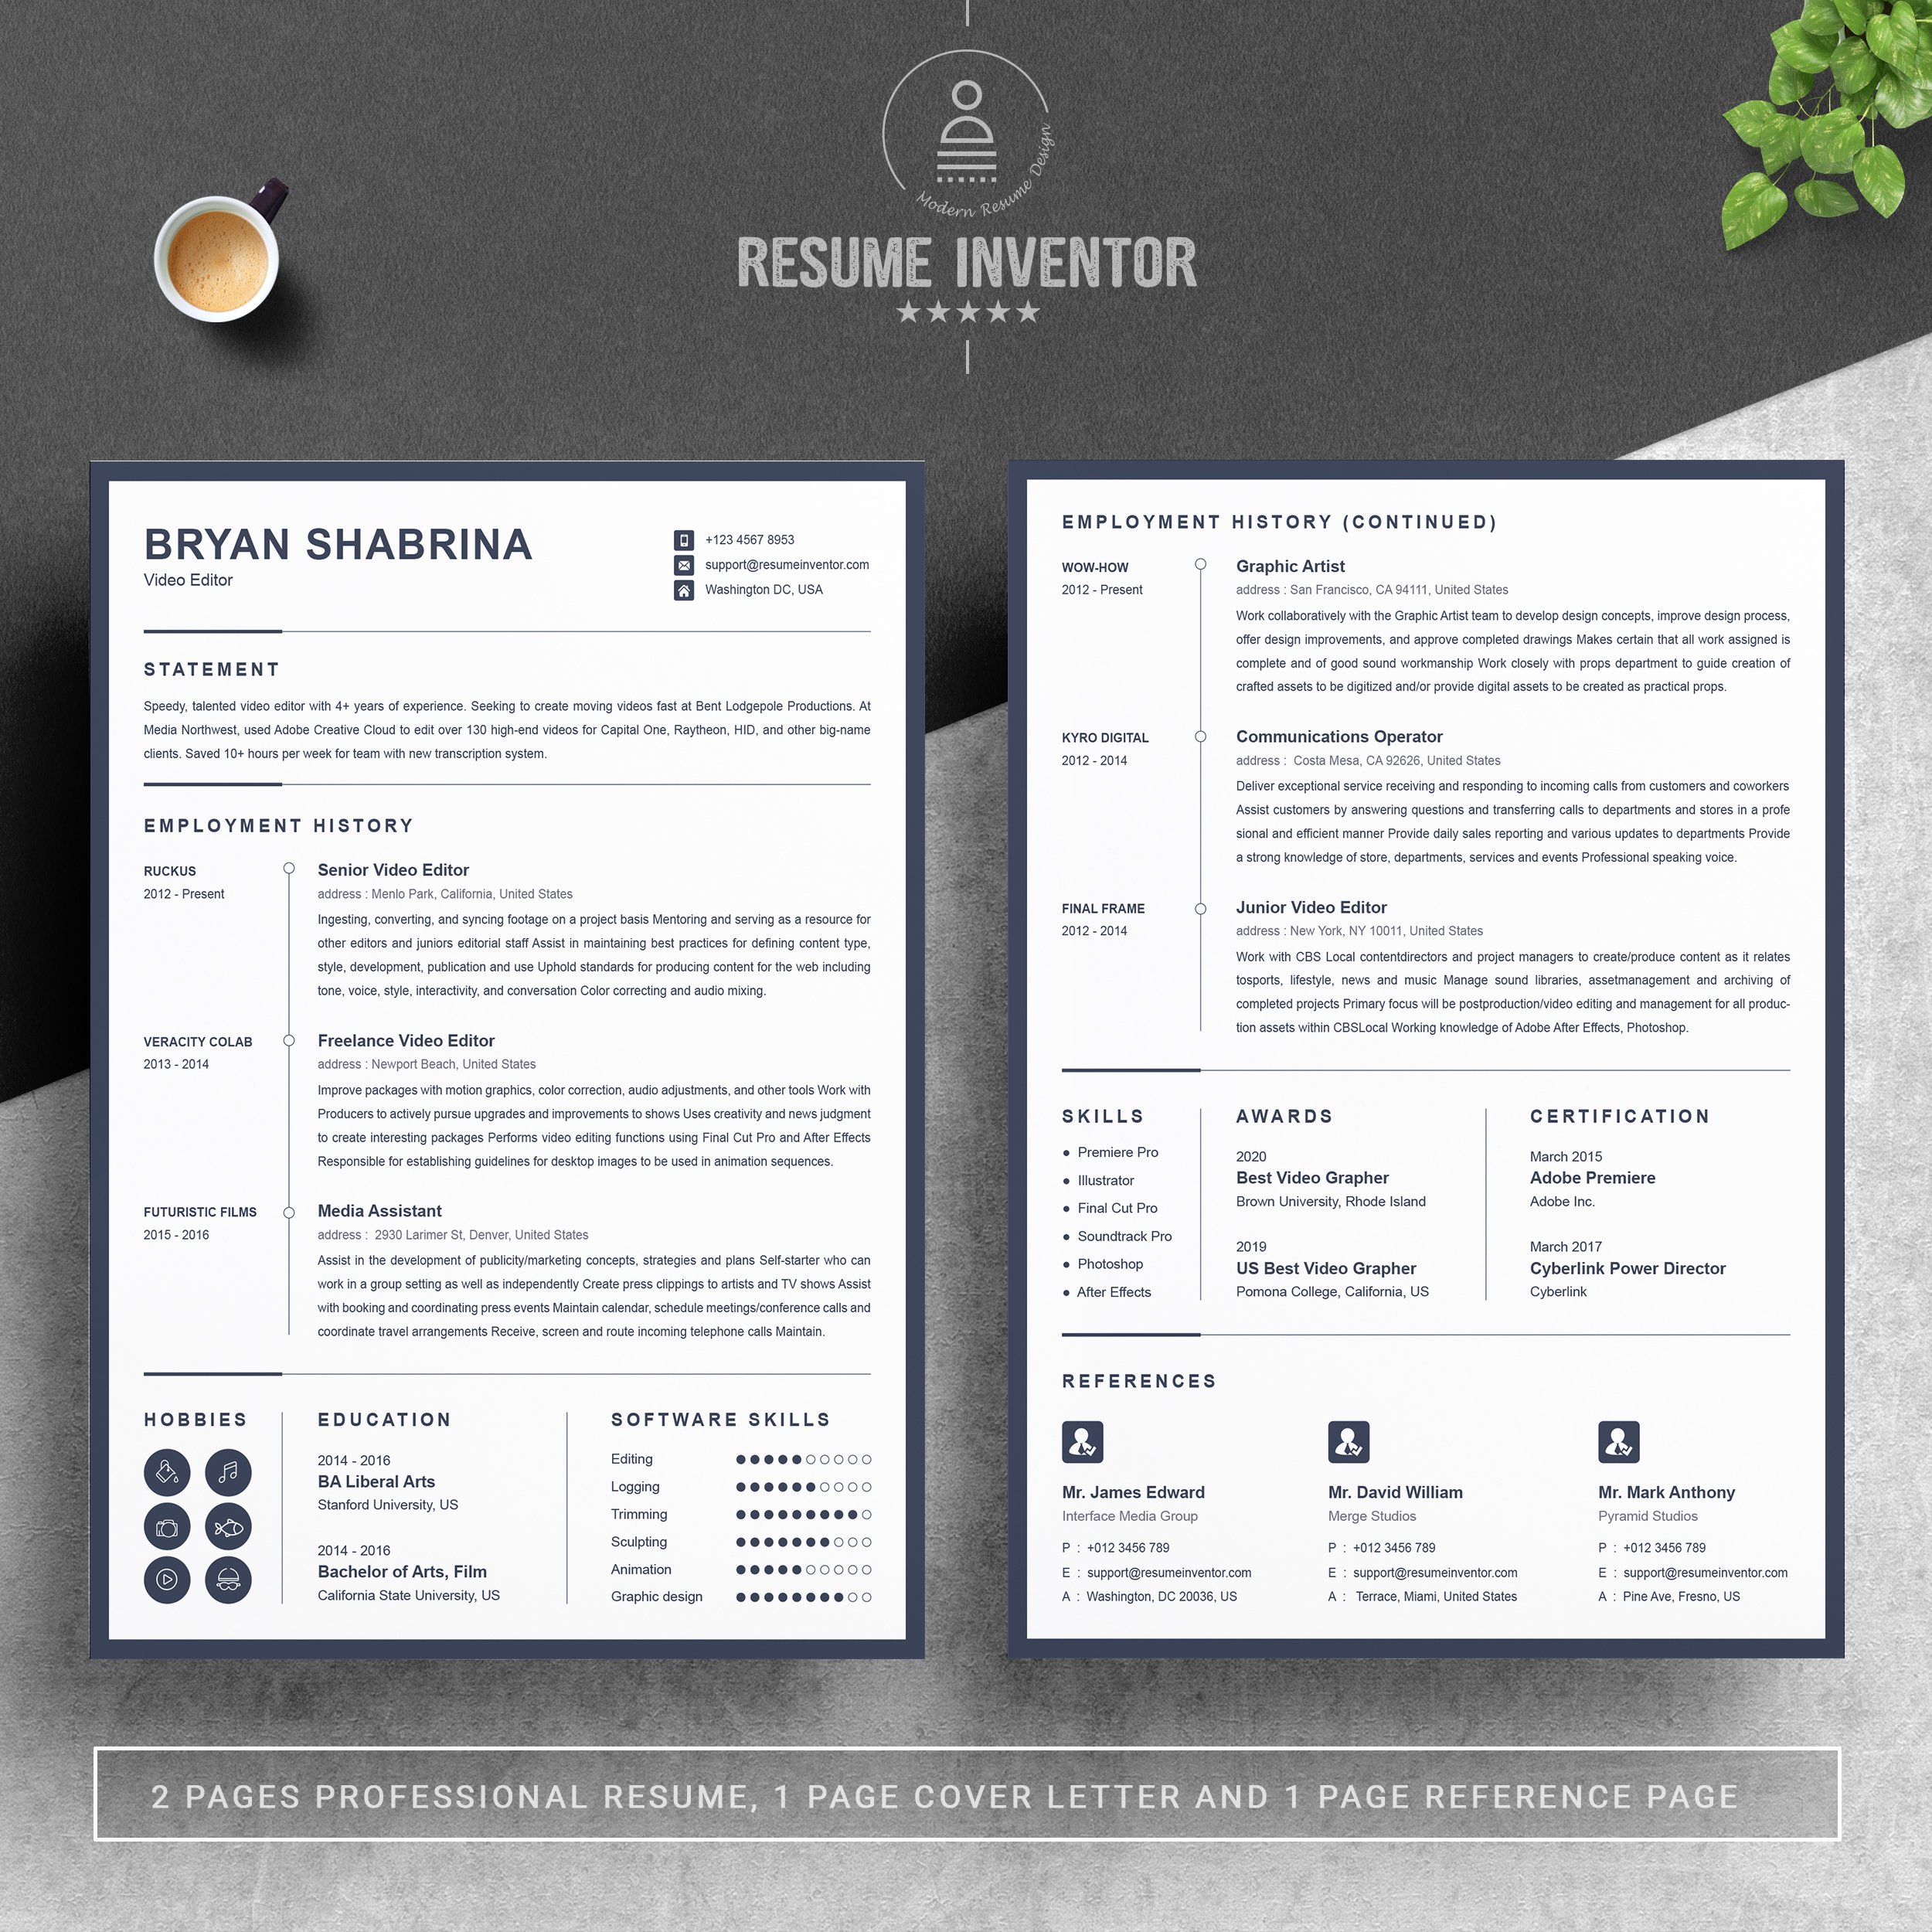 Resume / CV for Video Editor preview image.